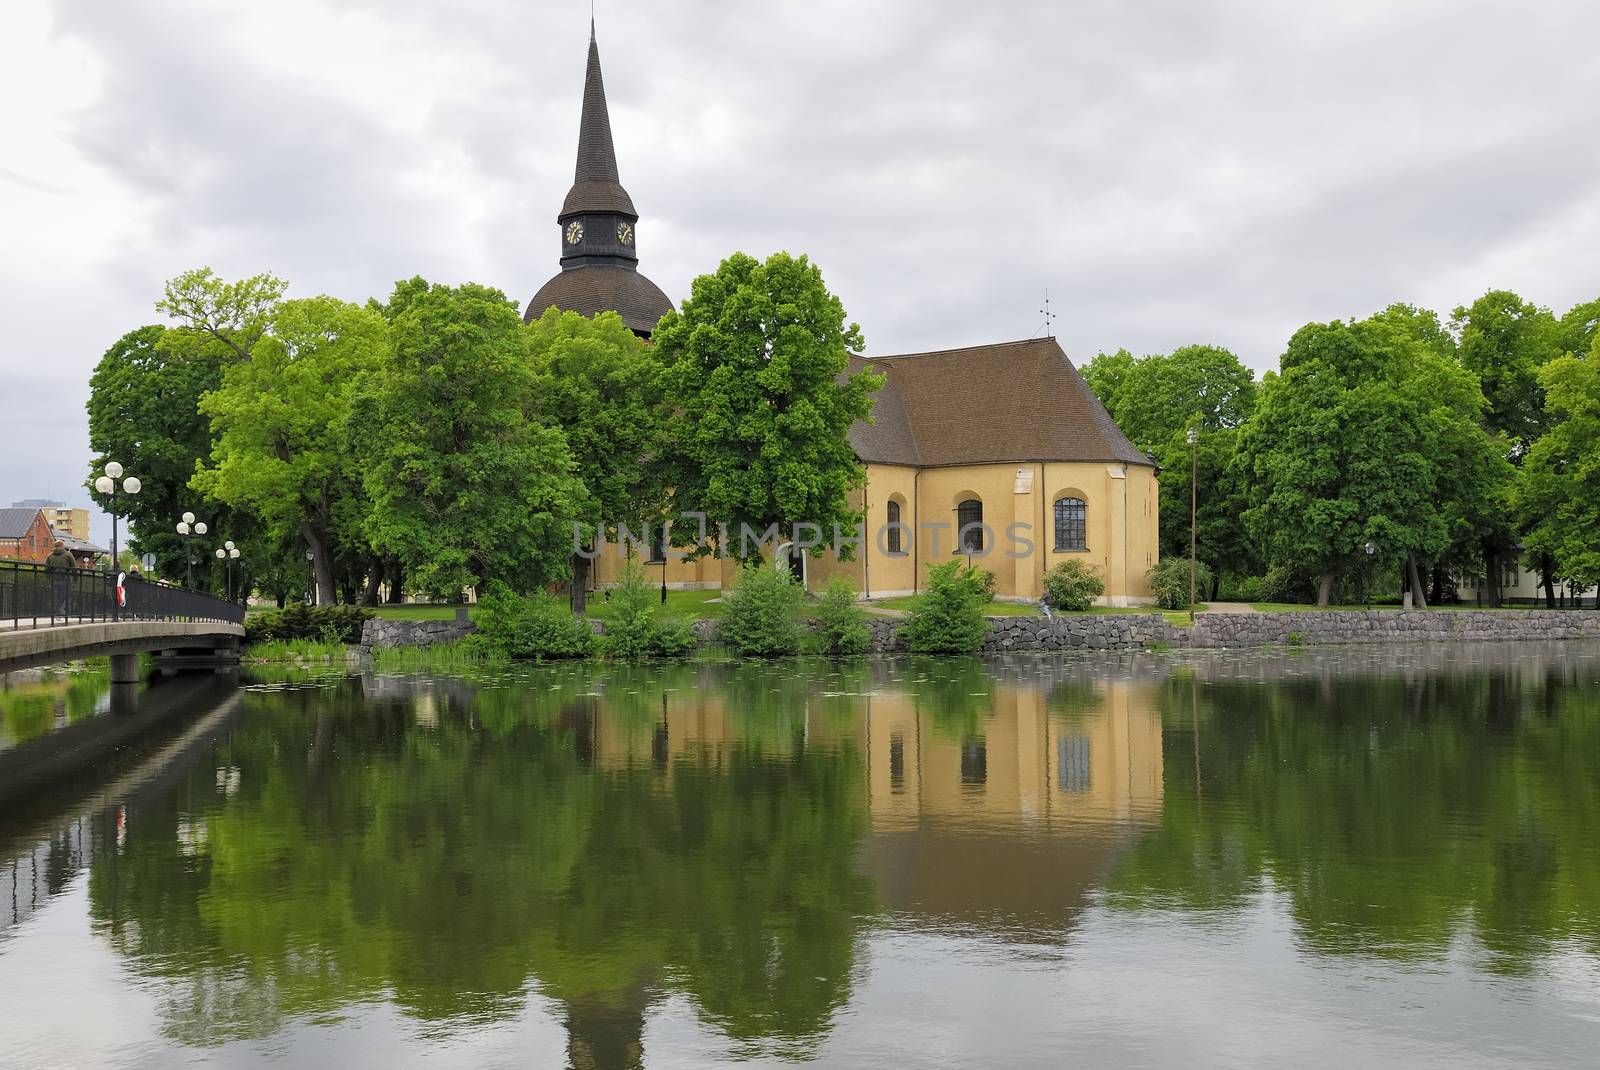 View over Fors church and the water (Eskilstuna river) flowing through the city of Eskilstuna in Södermanland, Sweden.